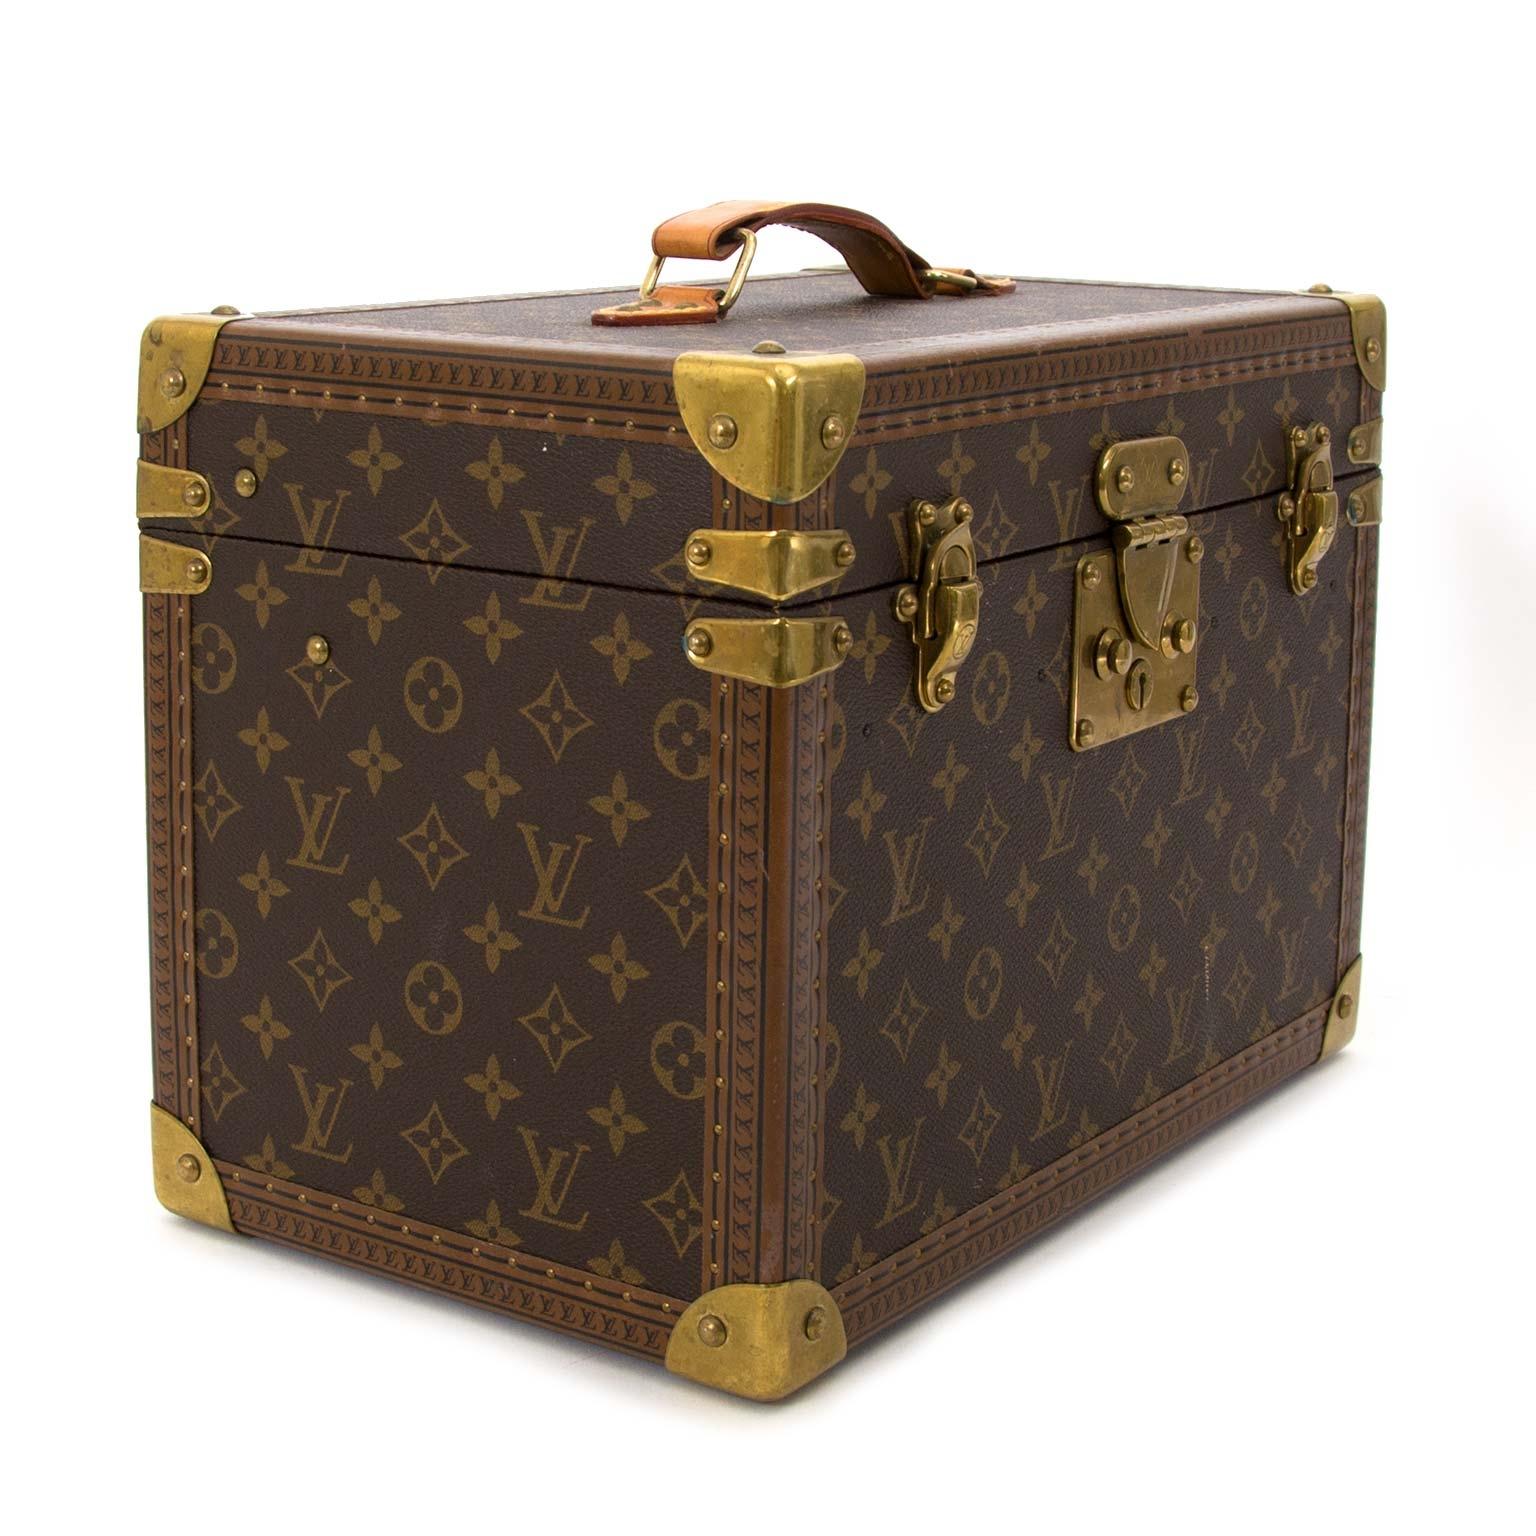 Good vintage condition

Louis Vuitton Vintage Monogram Travel Trunk Case

The perfect travel case to take on your holiday by Louis Vuitton. 
It's crafted of the iconic monogram canvas and finished with leather details and gold-tone hardware. 
The